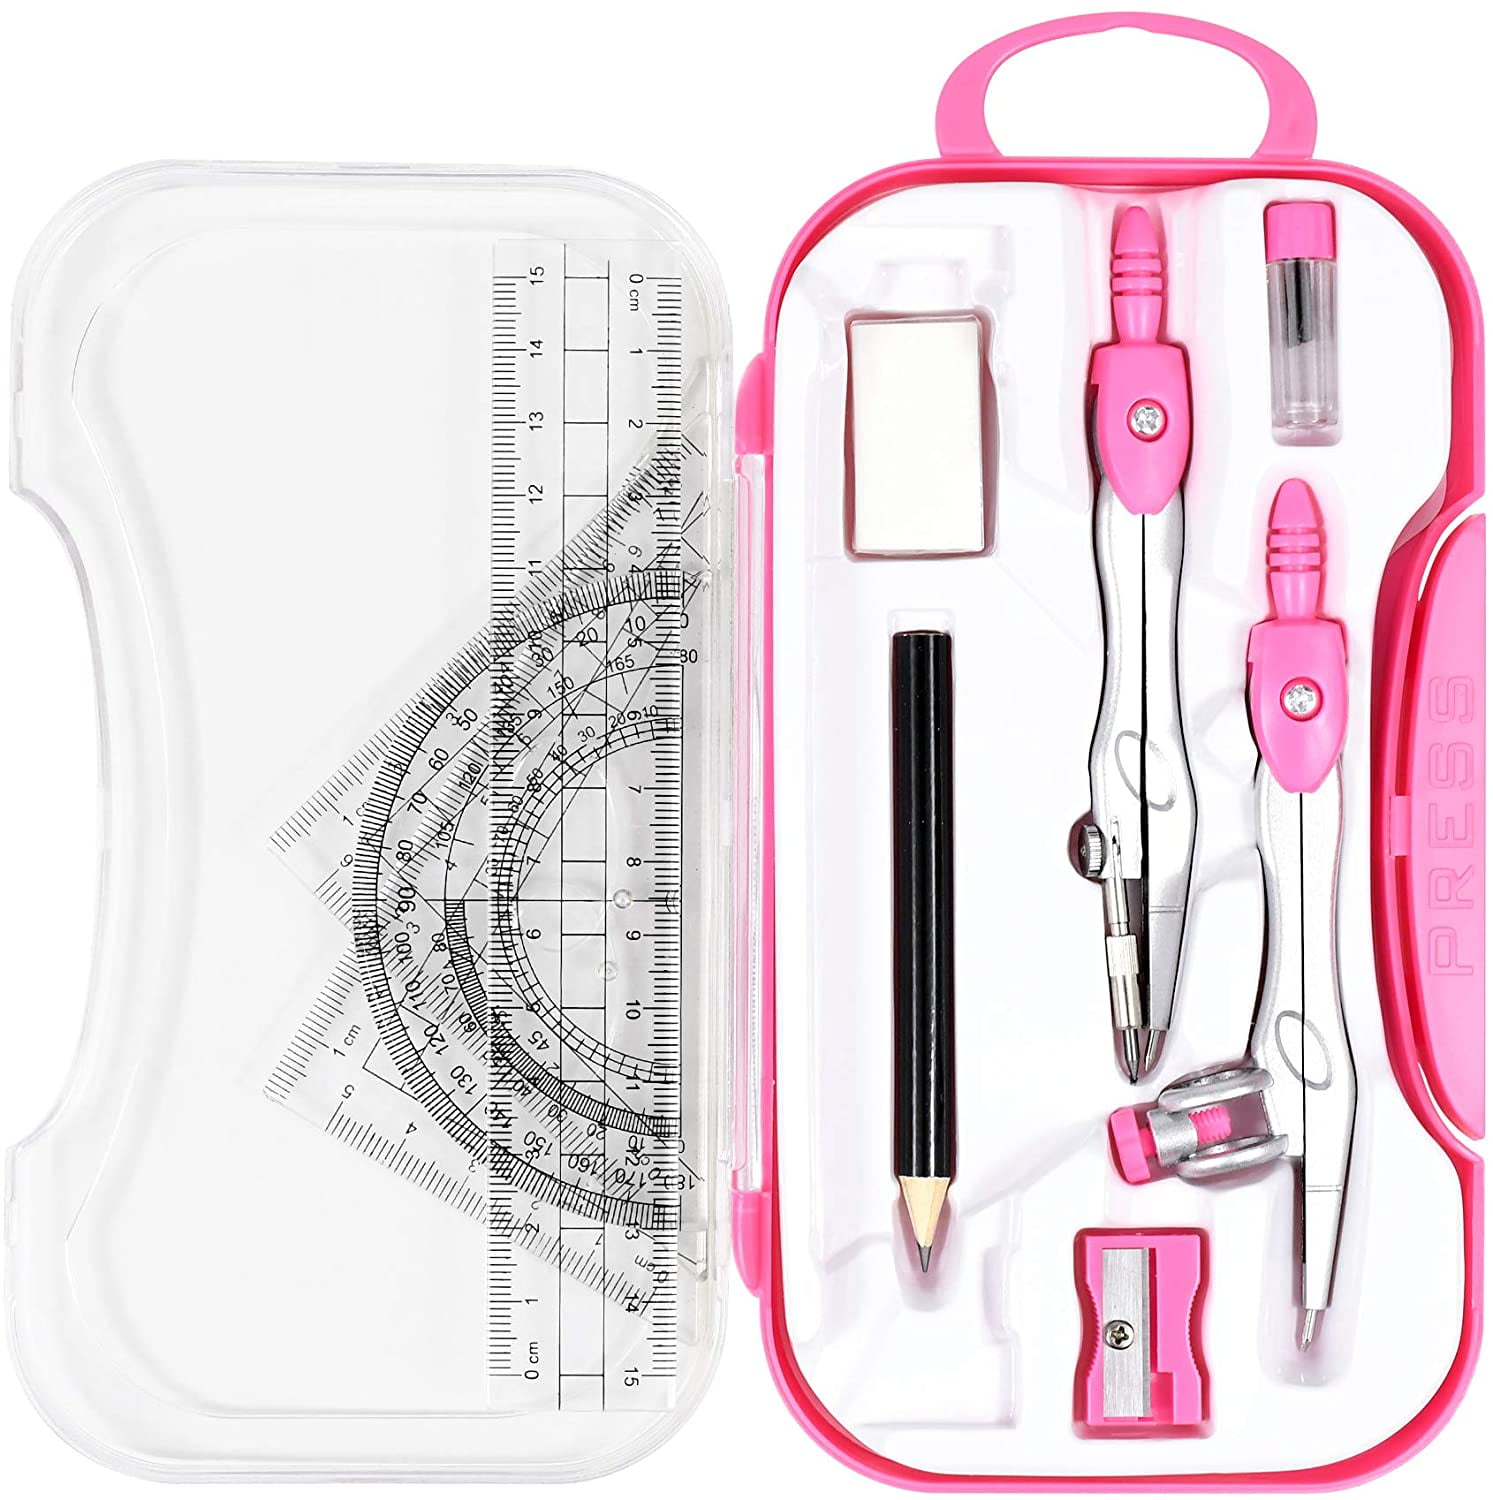 School Maths Set Student Stationery Set Drawing Compass and Protractor Set Rulers Pencil Sharpener Pencil Lead Refills Eraser 10 Pieces Geometry Set 